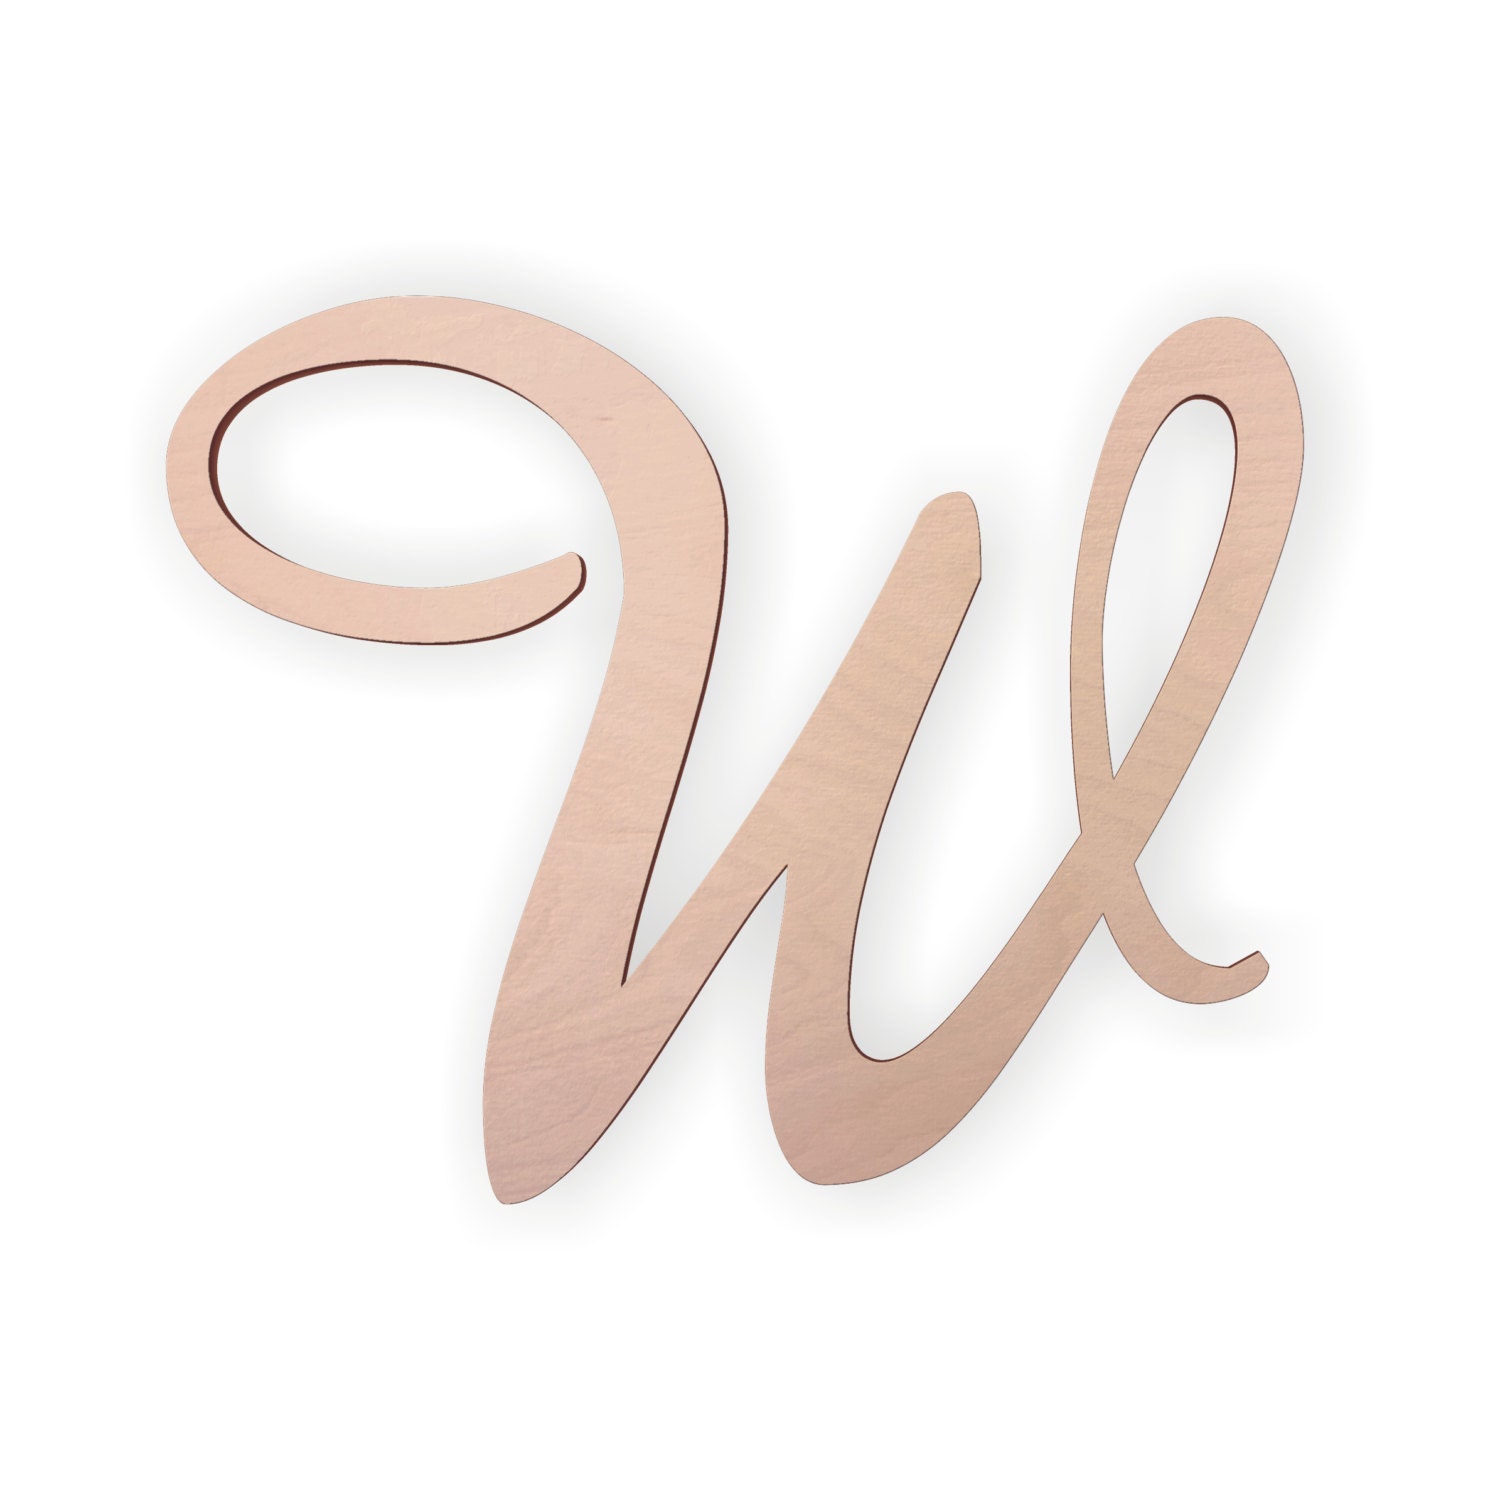 Wooden Monogram Letter l Large or Small, Unfinished, Cursive Wooden Letter  Perfect for Crafts, DIY, Weddings Sizes 1 to 36 